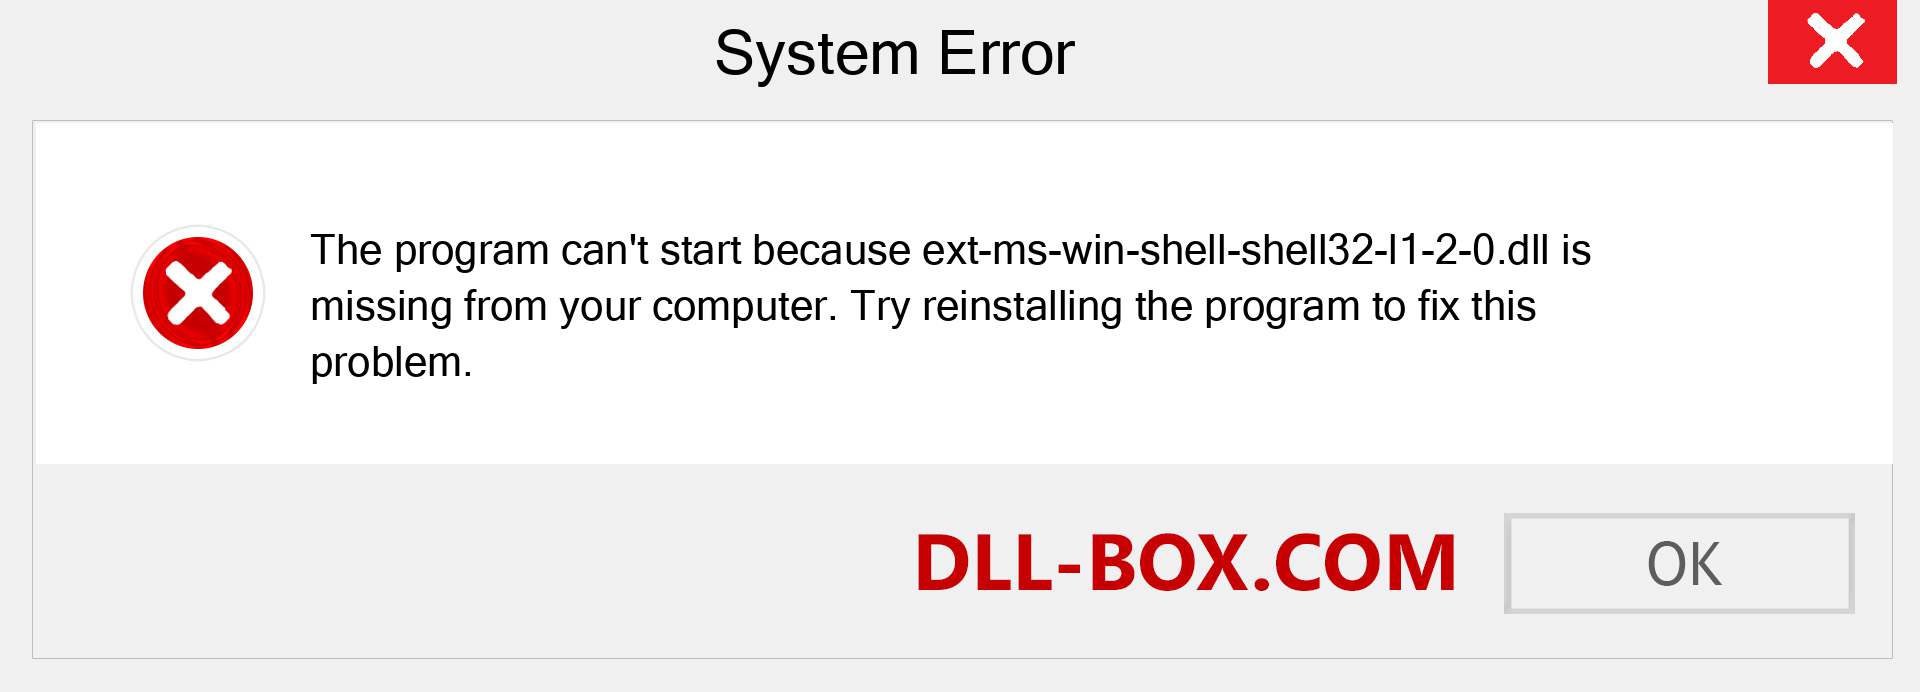  ext-ms-win-shell-shell32-l1-2-0.dll file is missing?. Download for Windows 7, 8, 10 - Fix  ext-ms-win-shell-shell32-l1-2-0 dll Missing Error on Windows, photos, images